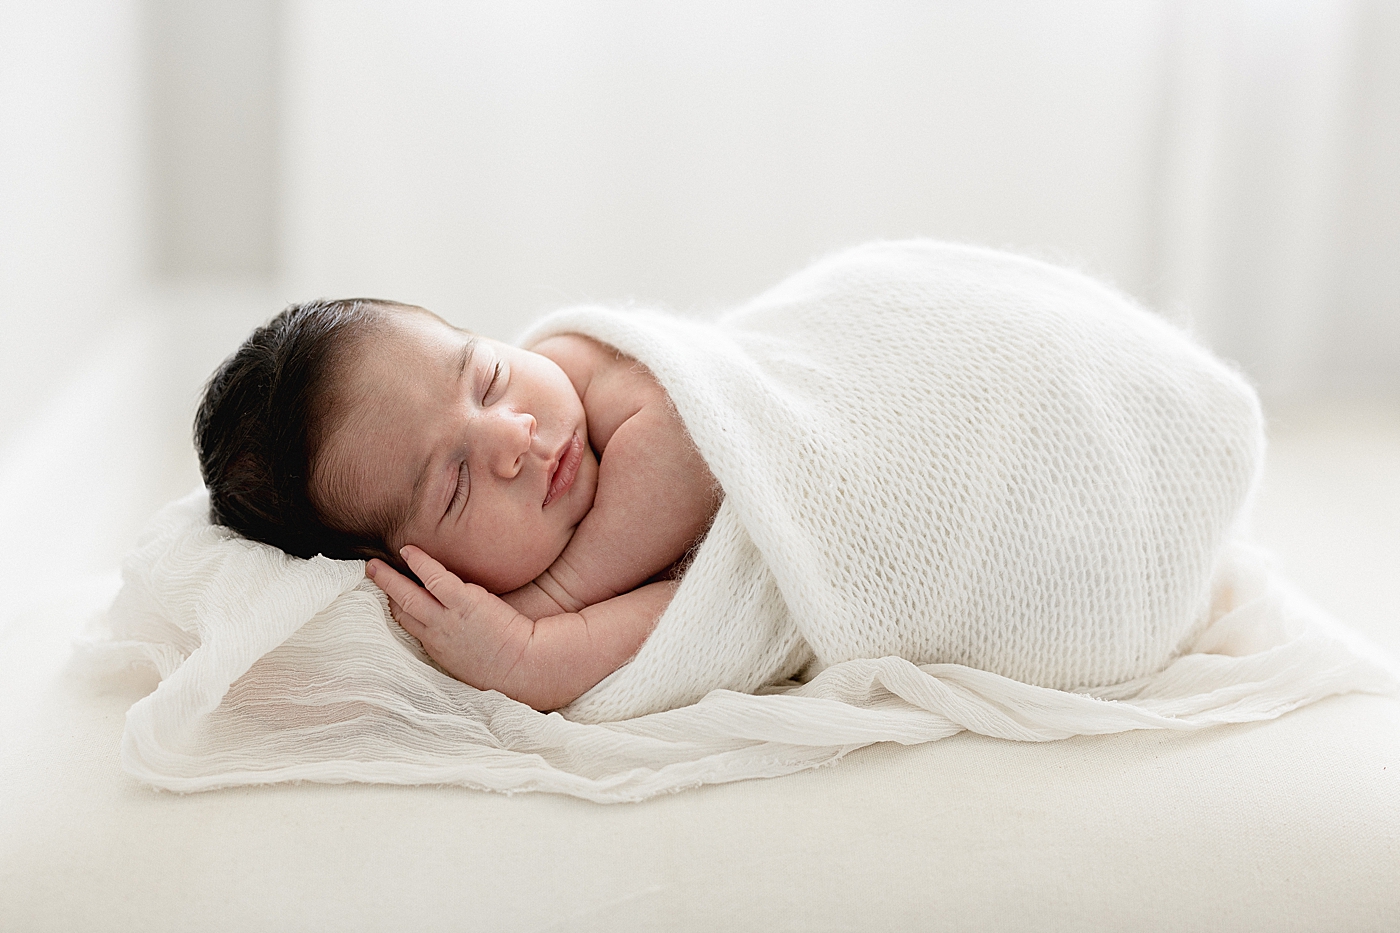 Baby boy swaddled and sleeping during newborn photos. Photo by Brittany Elise Photography.